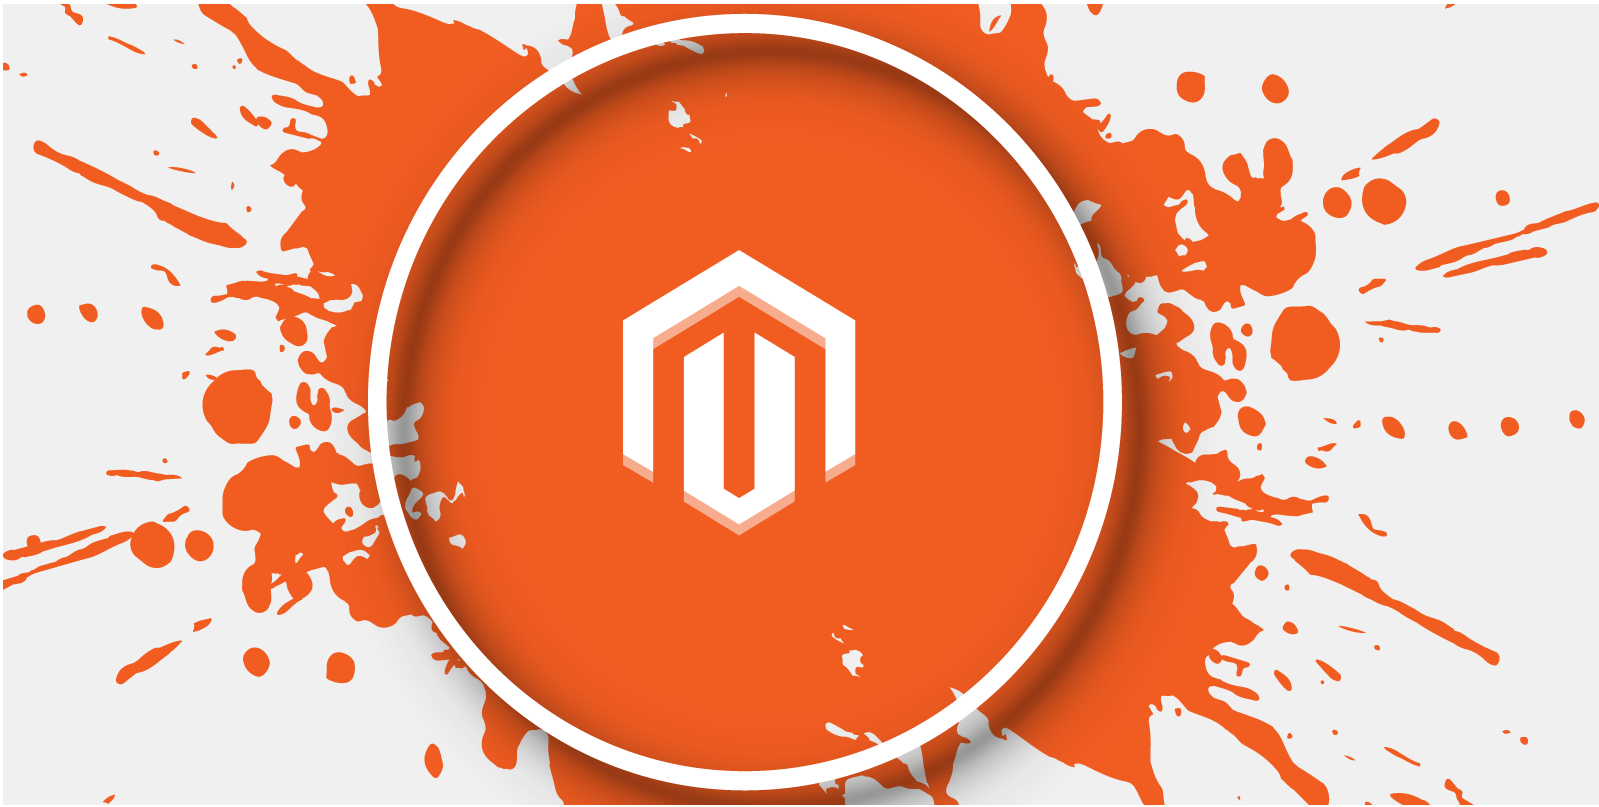  Magento Stands out Among All eCommerce Platforms